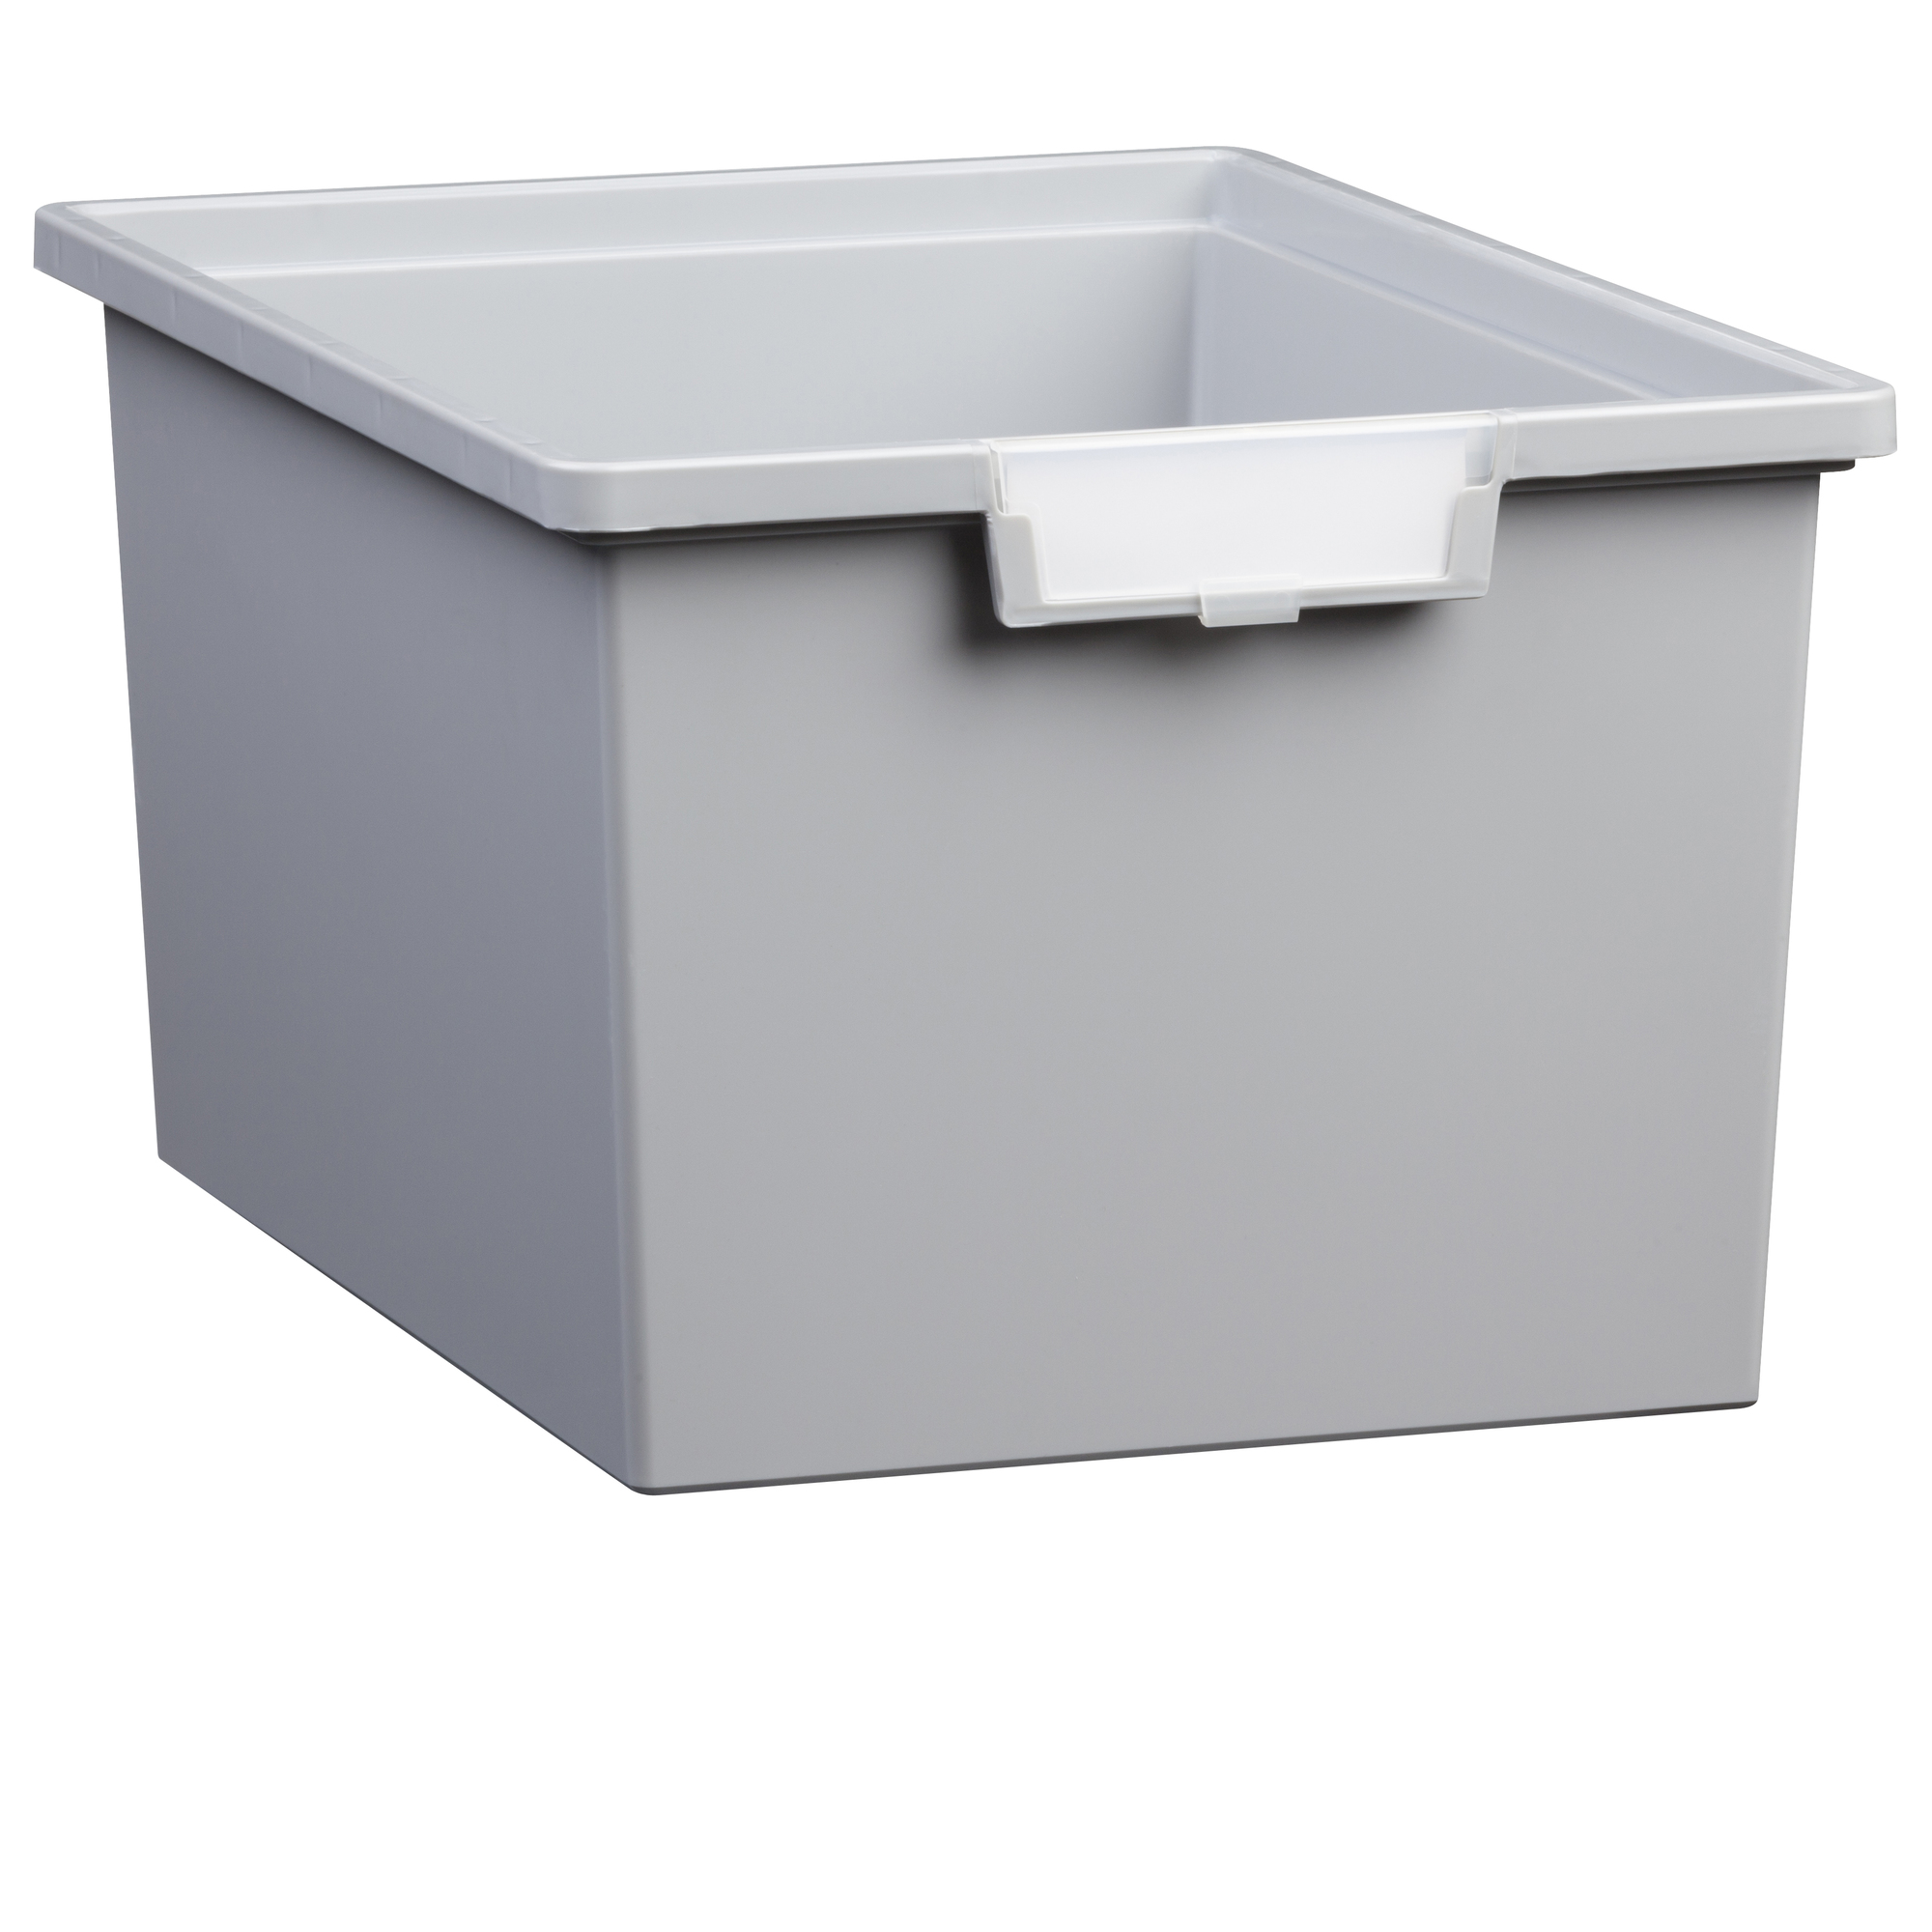 Certwood StorWerks, Slim Line 9Inch Tray in Light Gray-1PK, Included (qty.) 1 Height 9 in, Model CE1953LG1